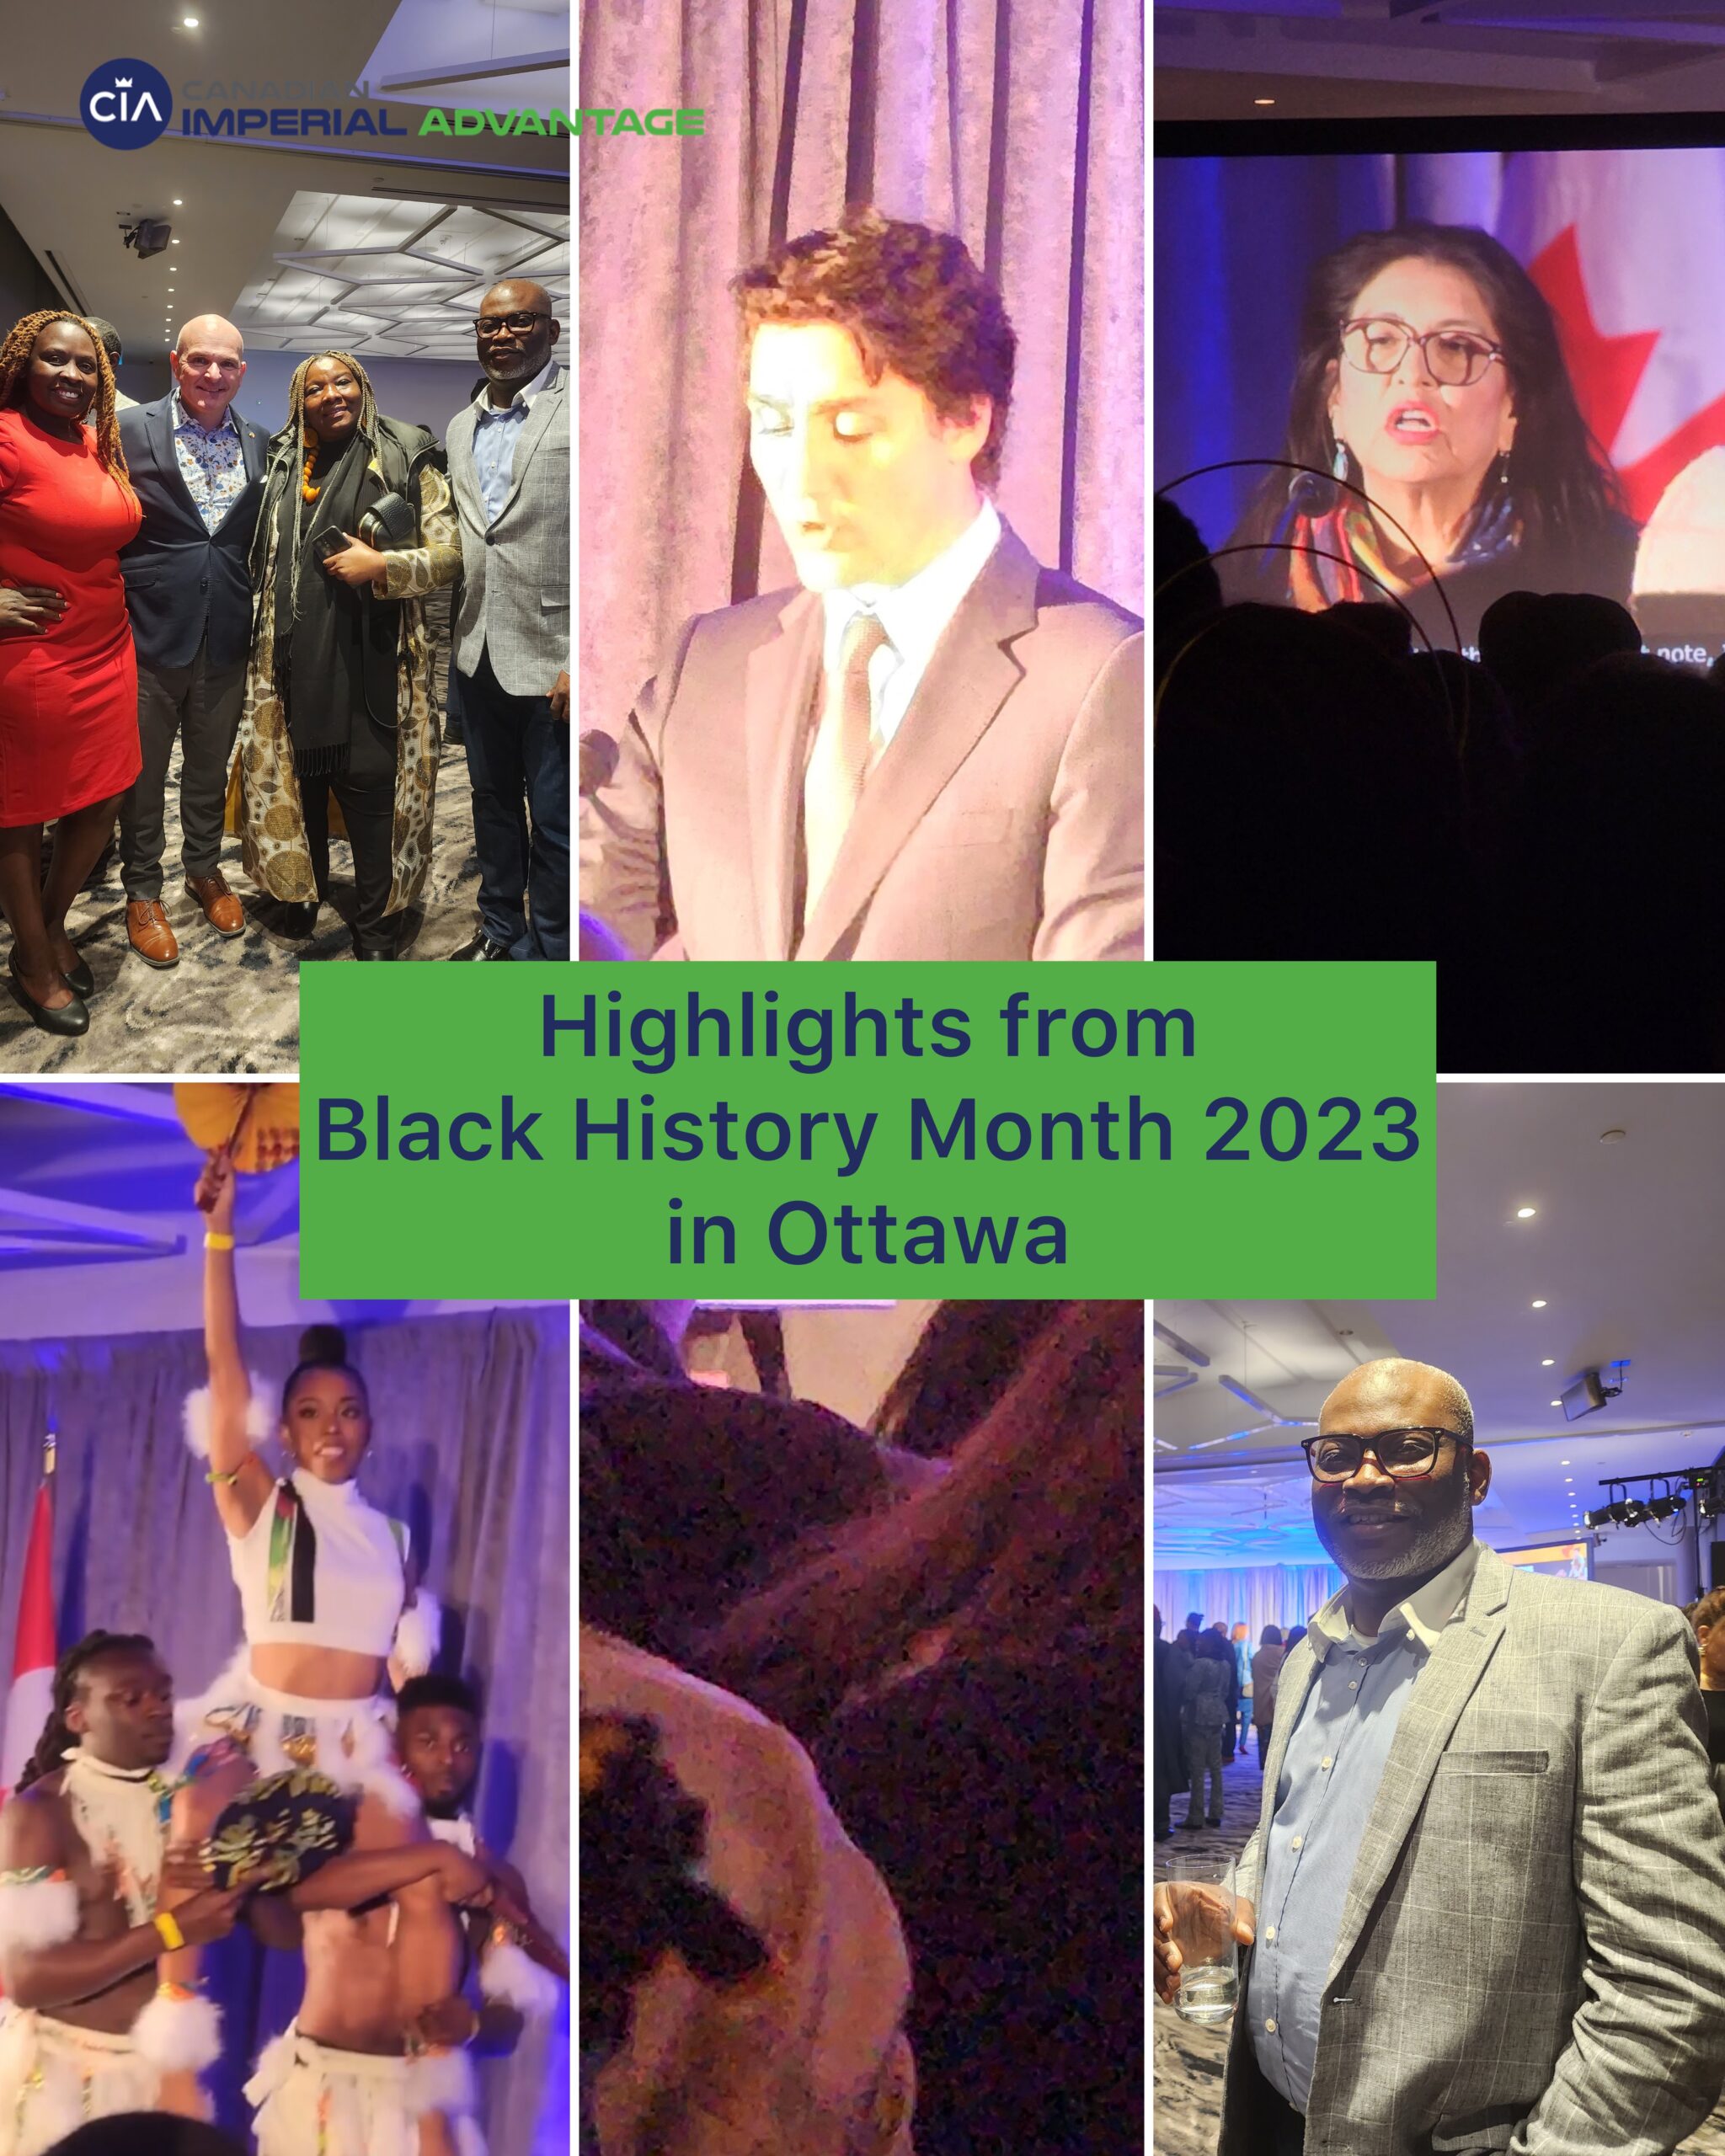 CIA at the Official Black History Month Celebration 2023 in Ottawa